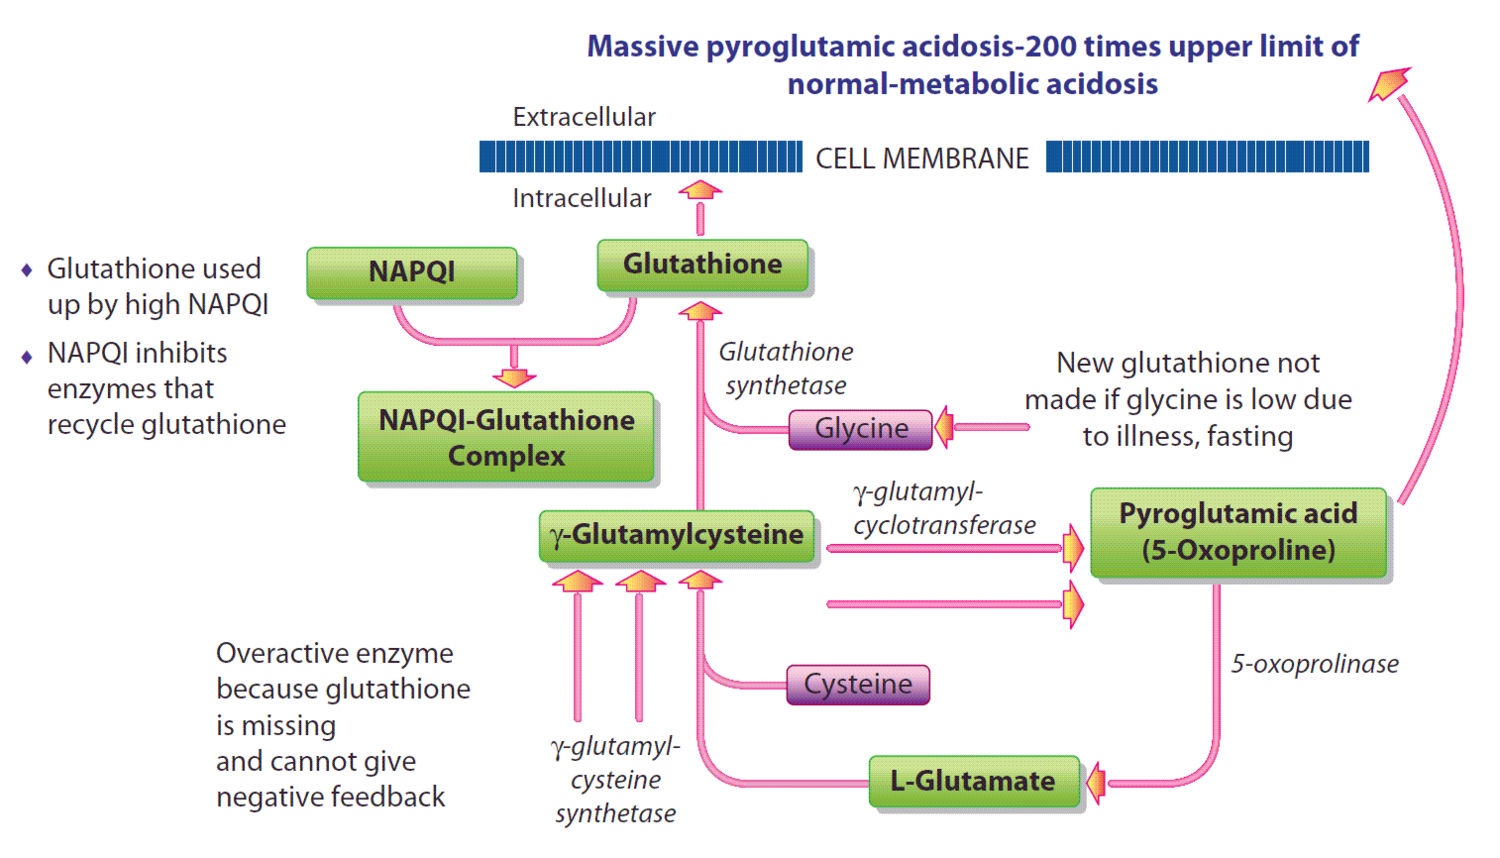 Figure 3b: Metabolism of GSH after exposure to high doses of acetaminophen.(Click for larger view)